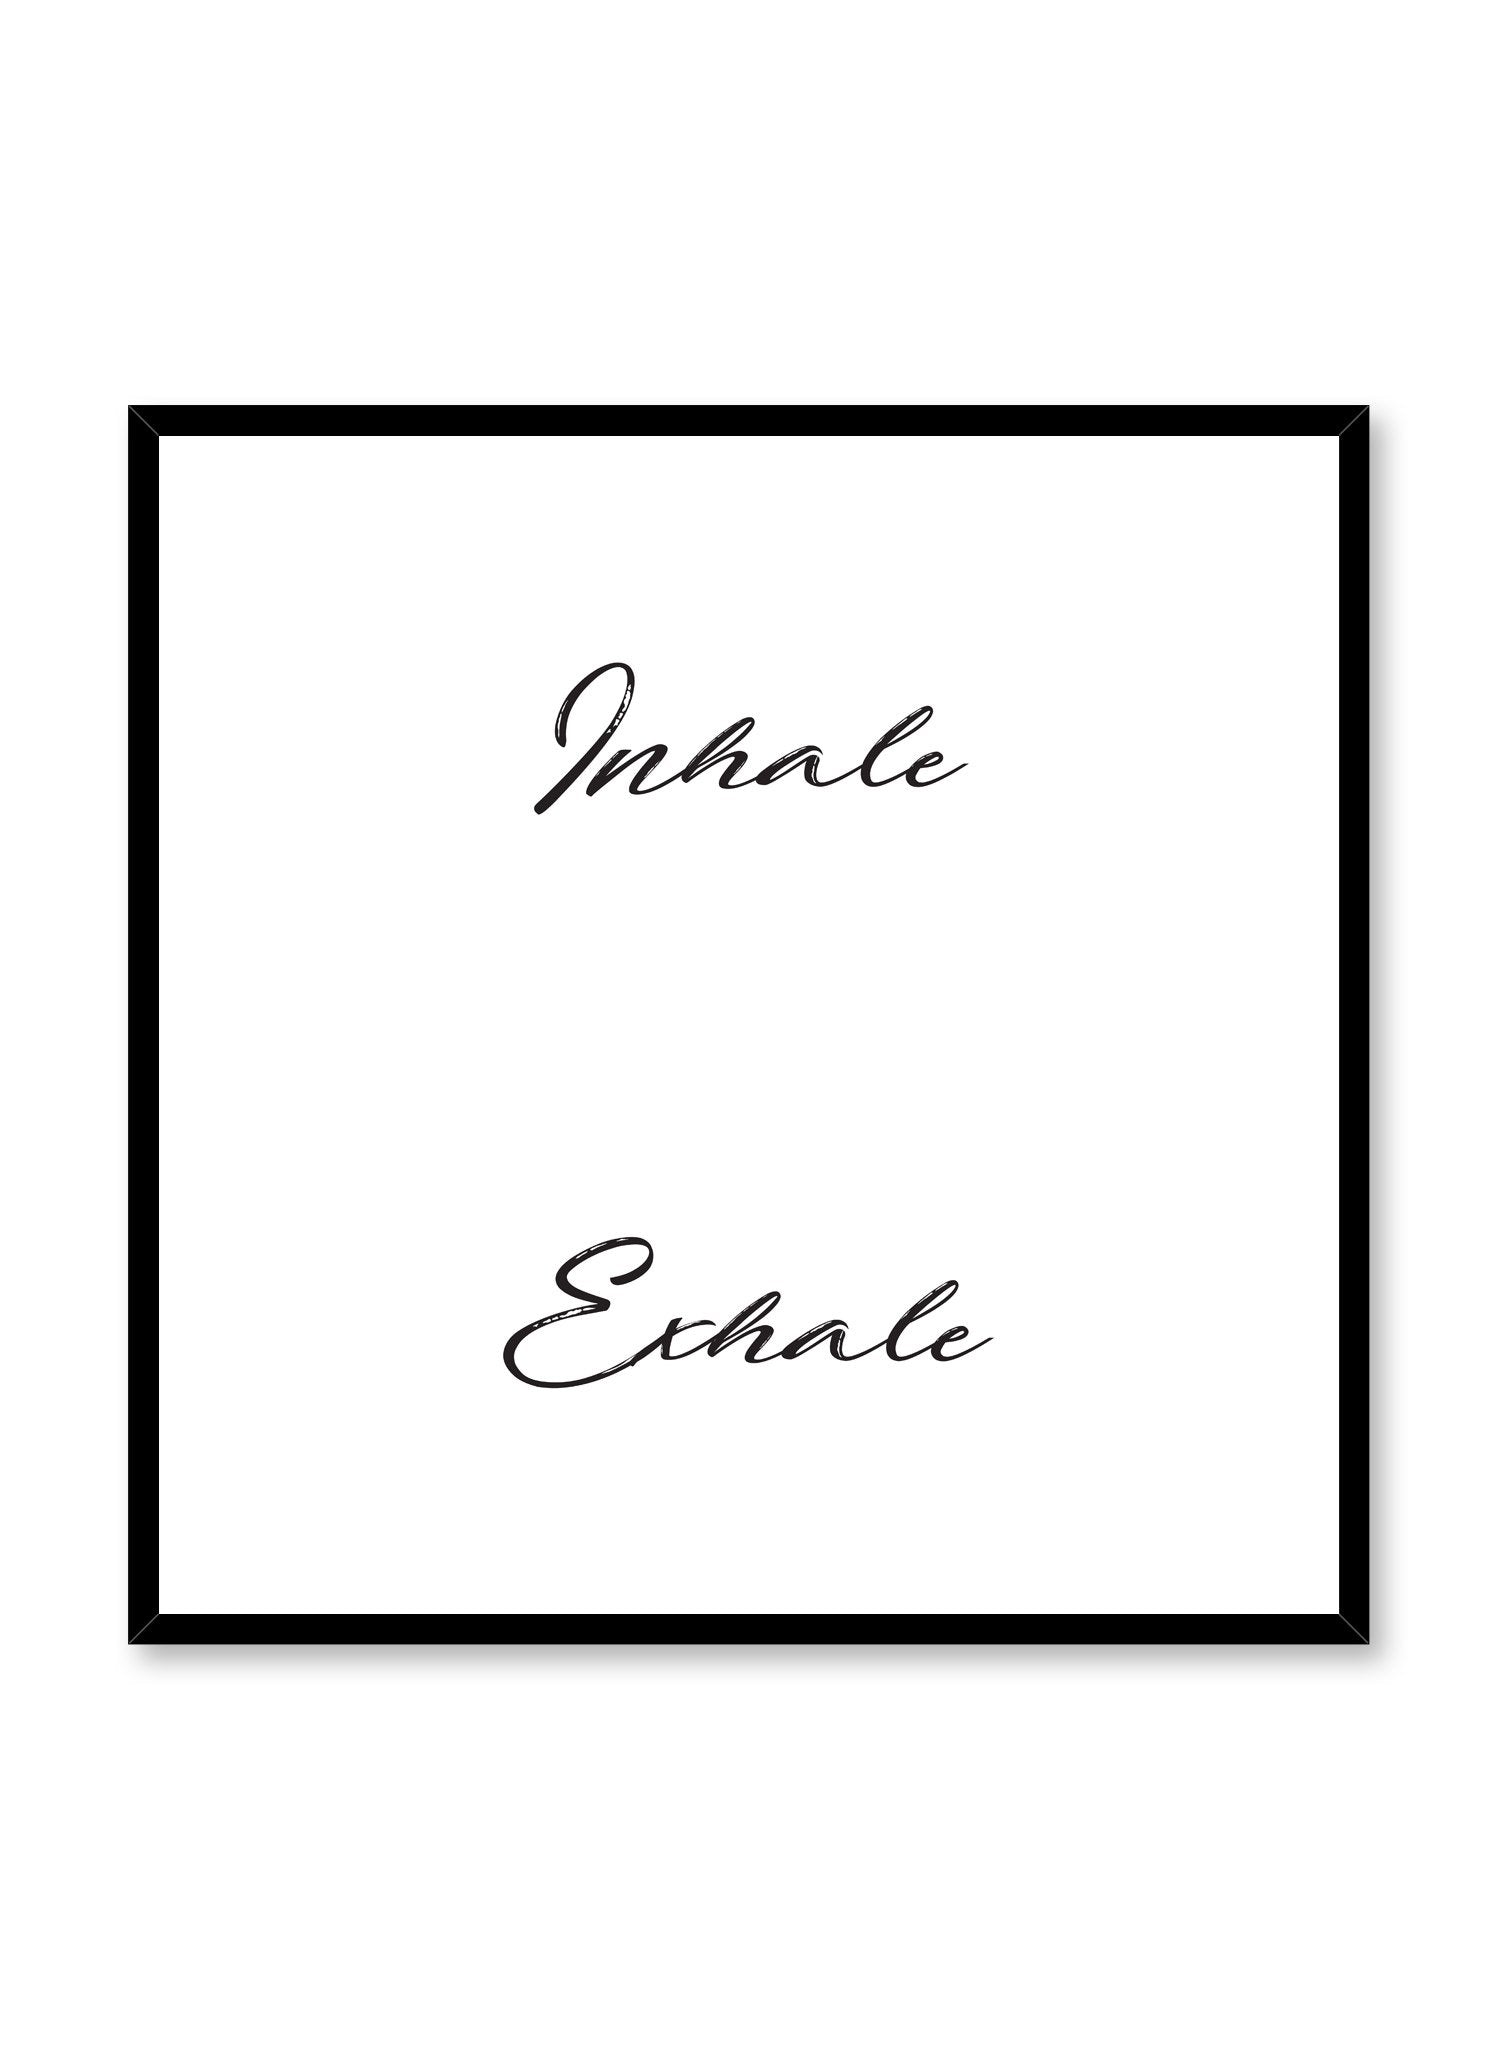 Scandinavian poster with black and white graphic typography design of Inhale Exhale by Opposite Wall in square format